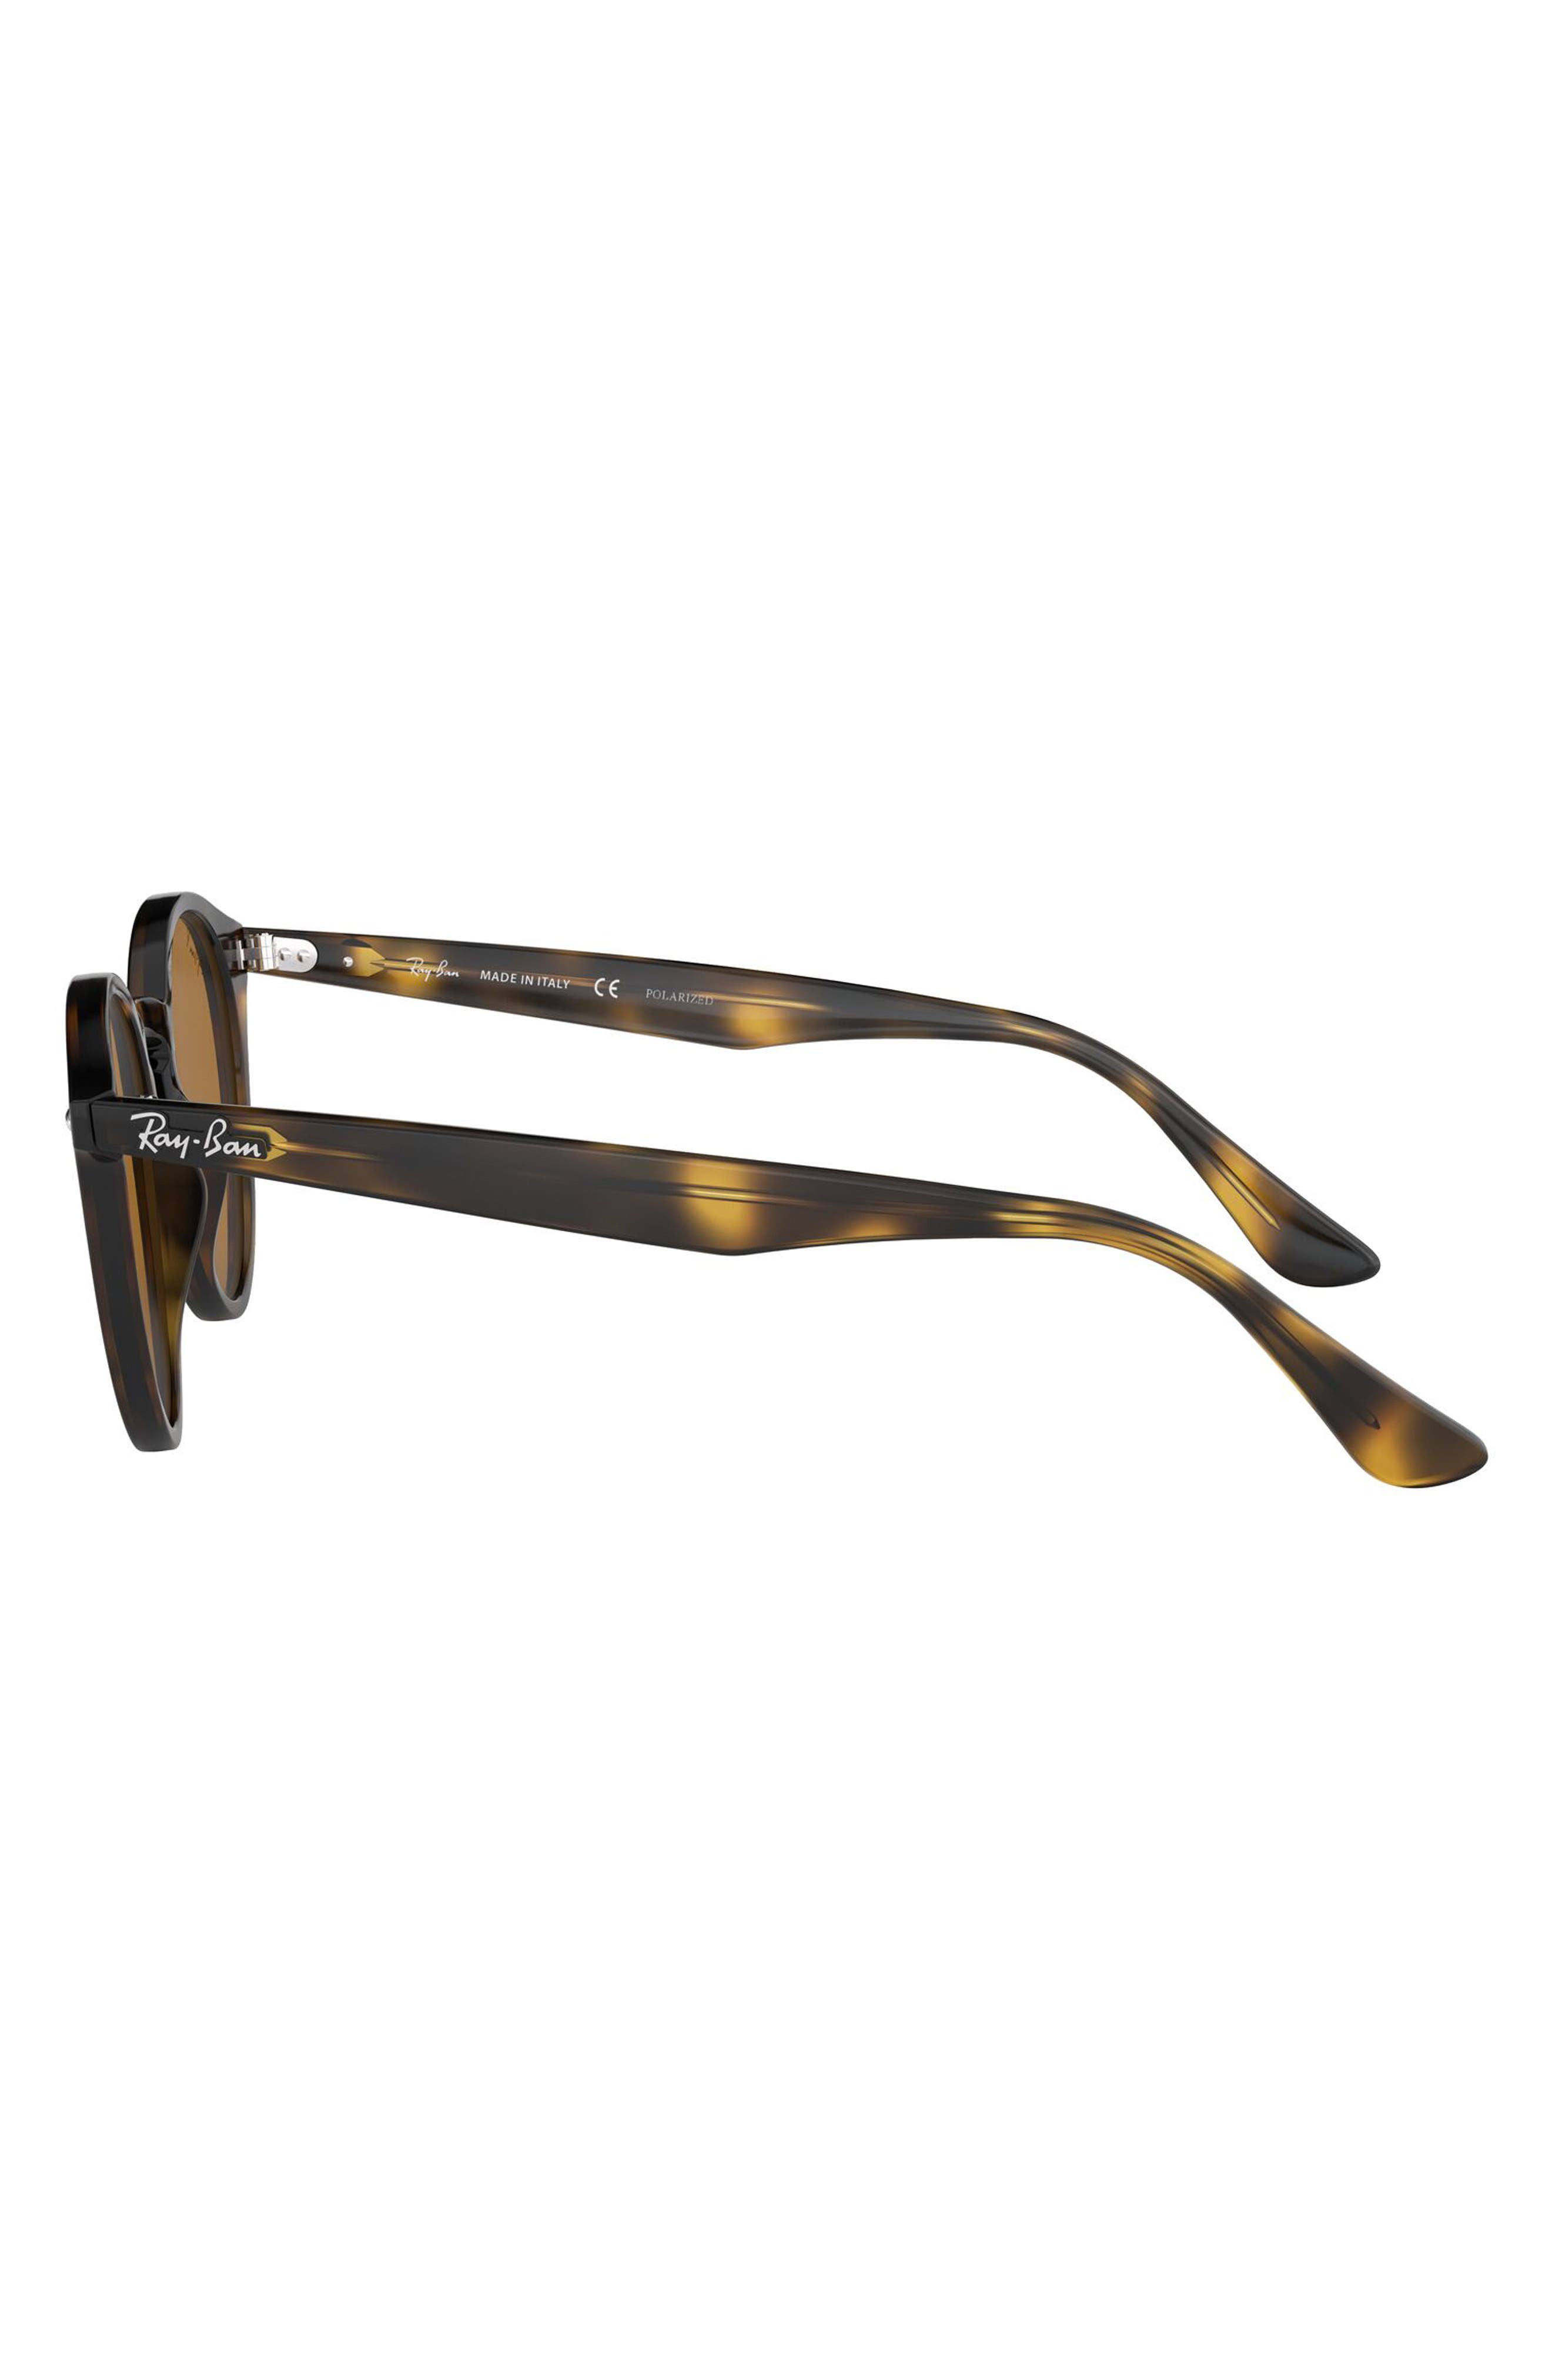 Young Generation Vintage Eyeglasses Eyewear Made in Italy Round gold Black 49mm 